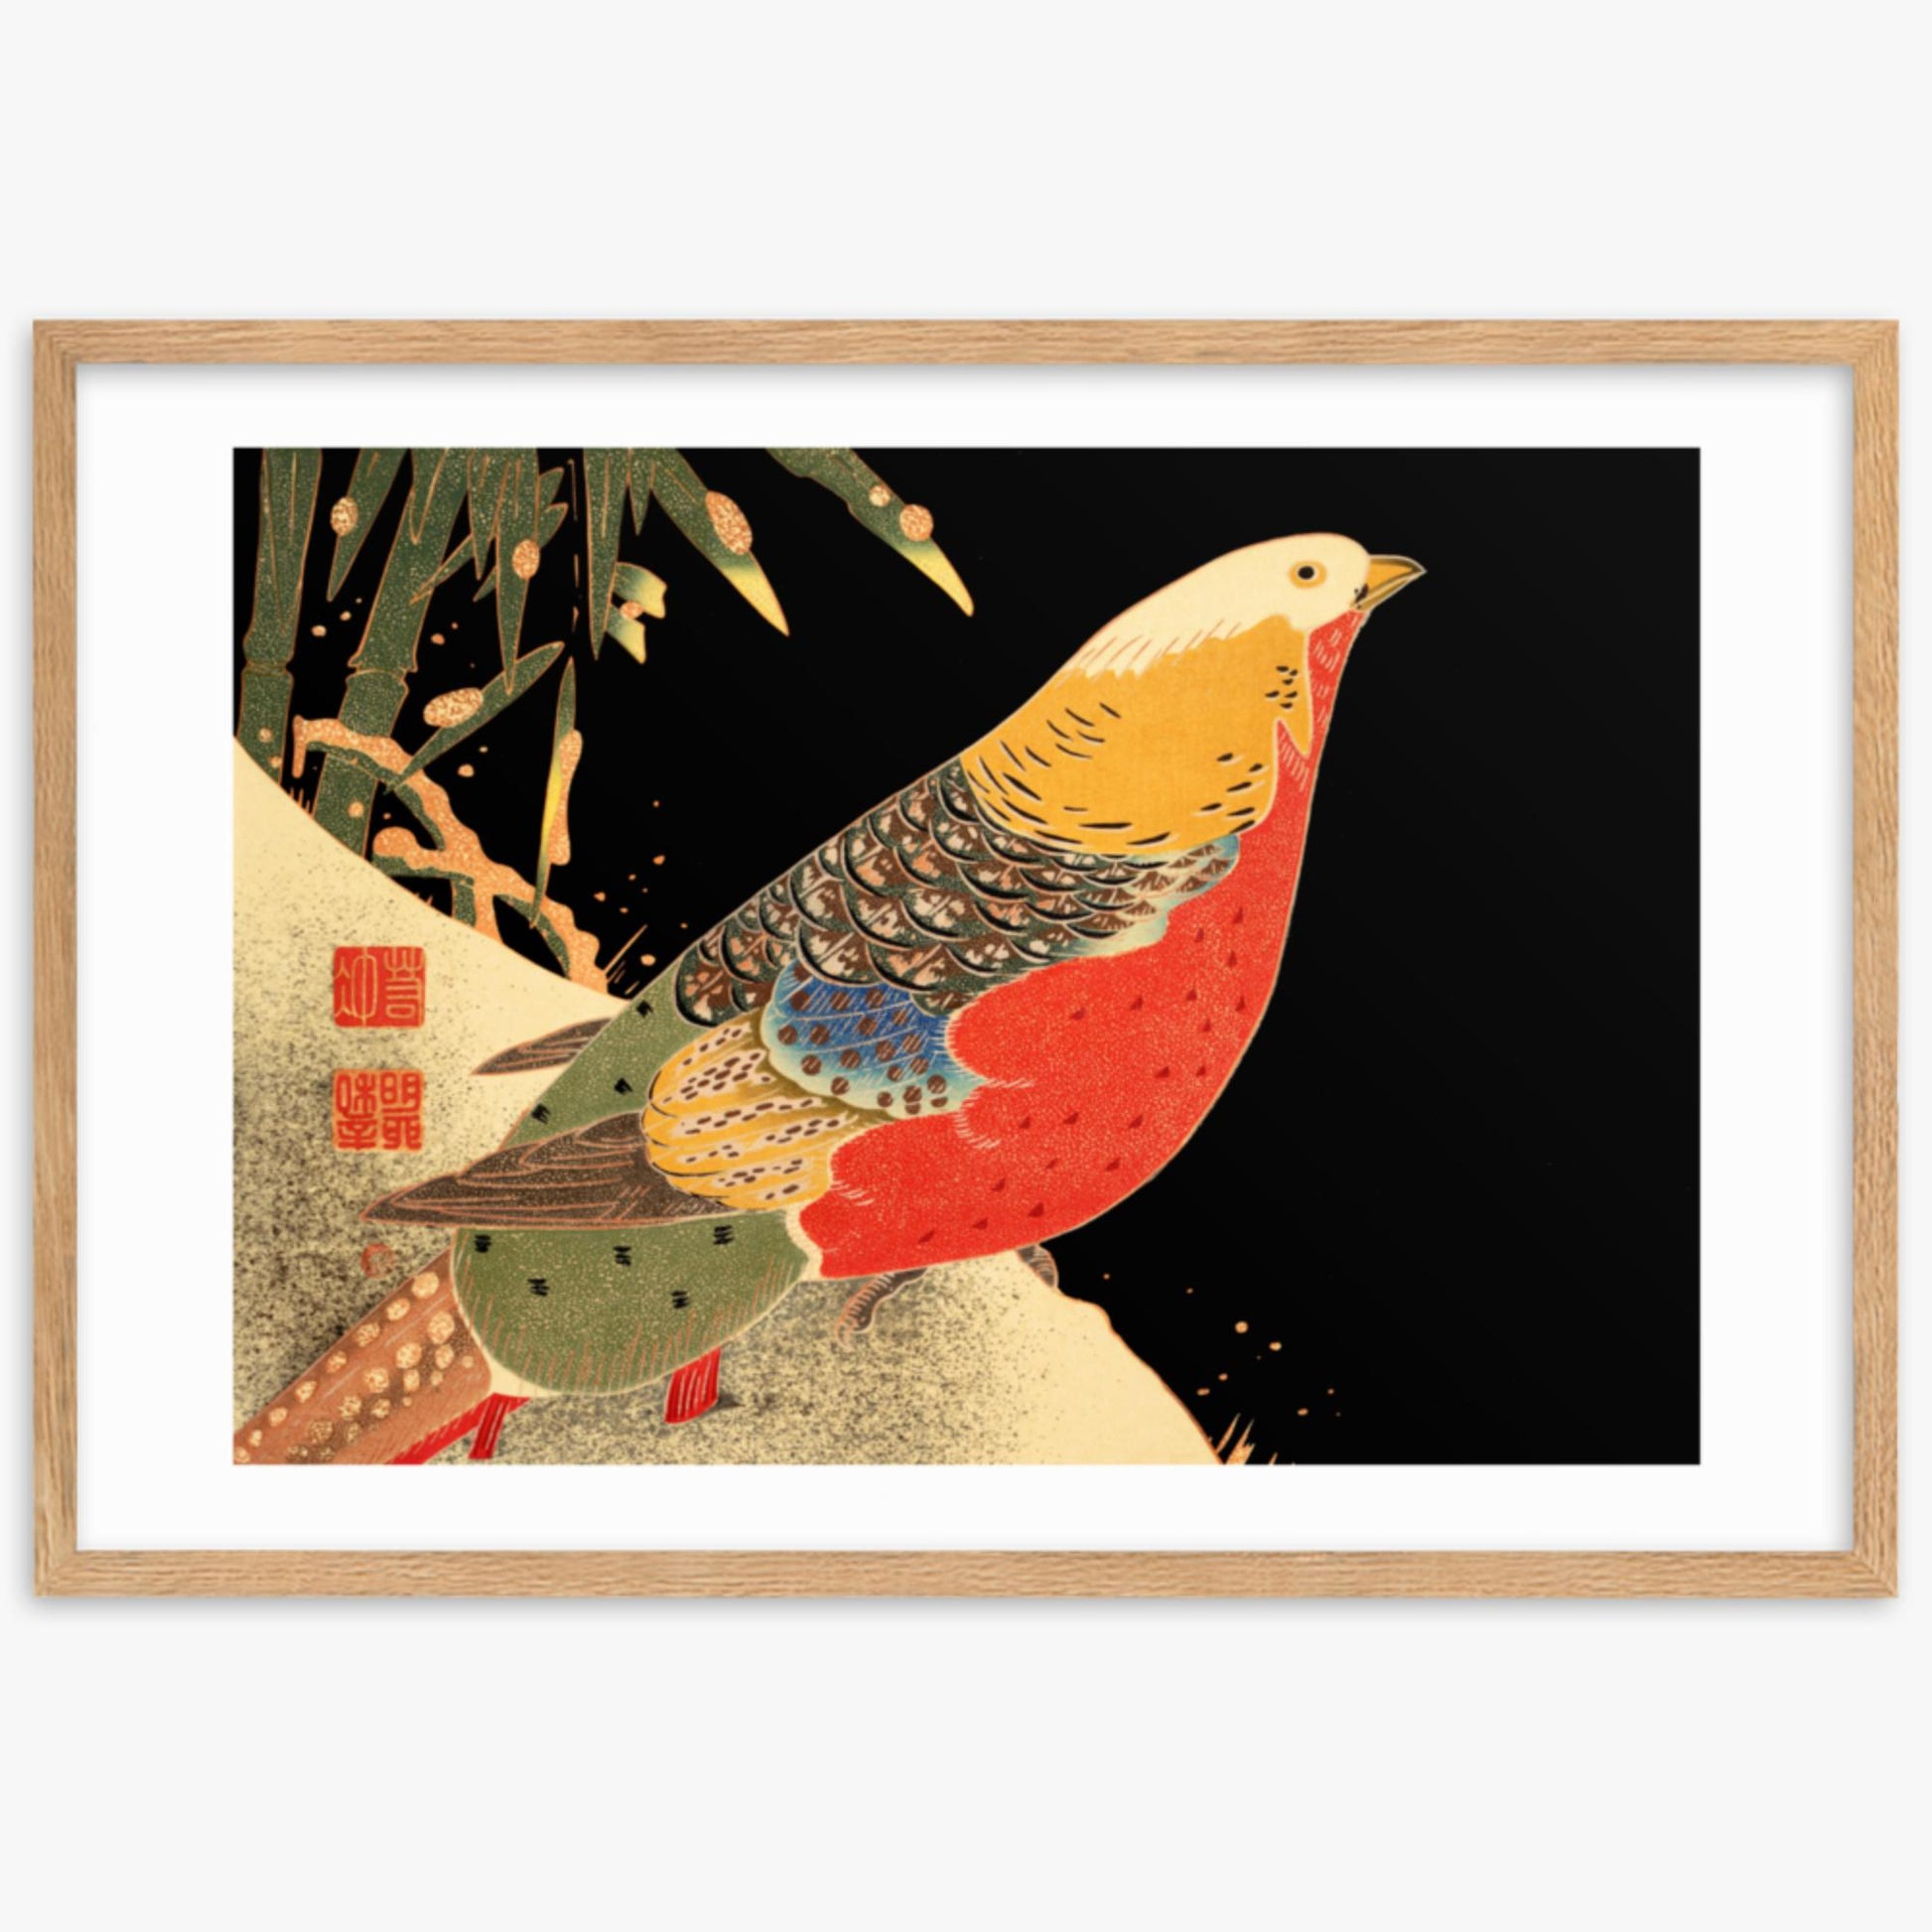 Ito Jakuchu - Golden Pheasant in the Snow 61x91 cm Poster With Oak Frame